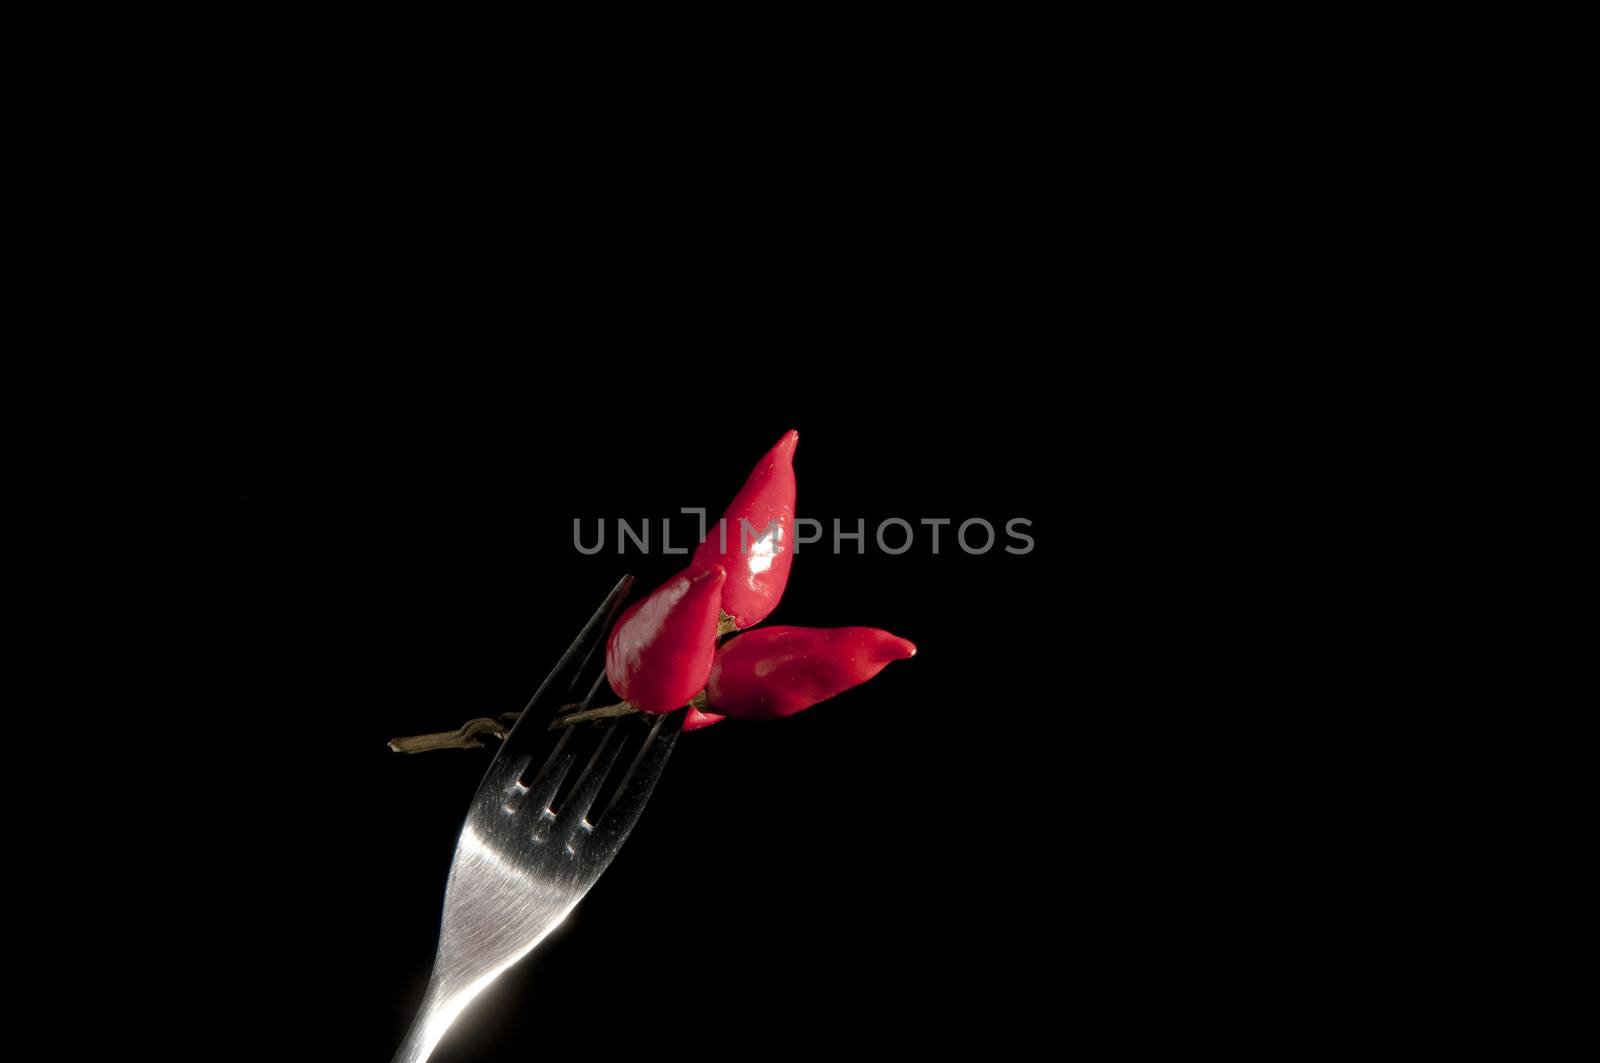 chilli on a fork with black background